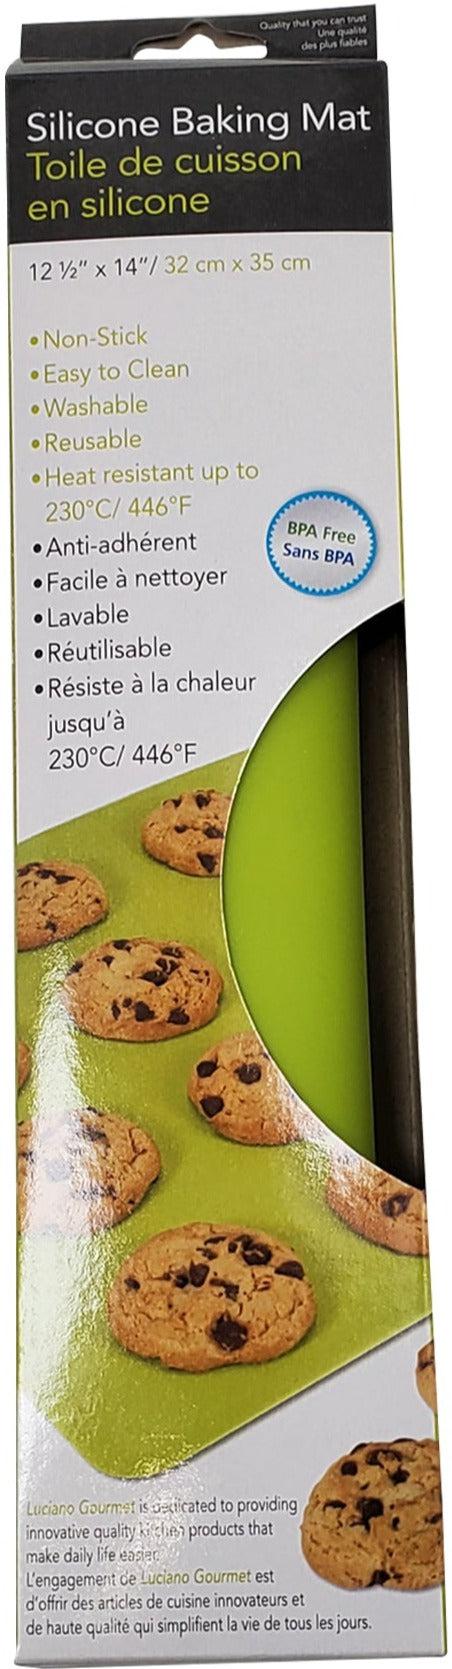 Le Gourmet - Silicone Baker's Mat 14